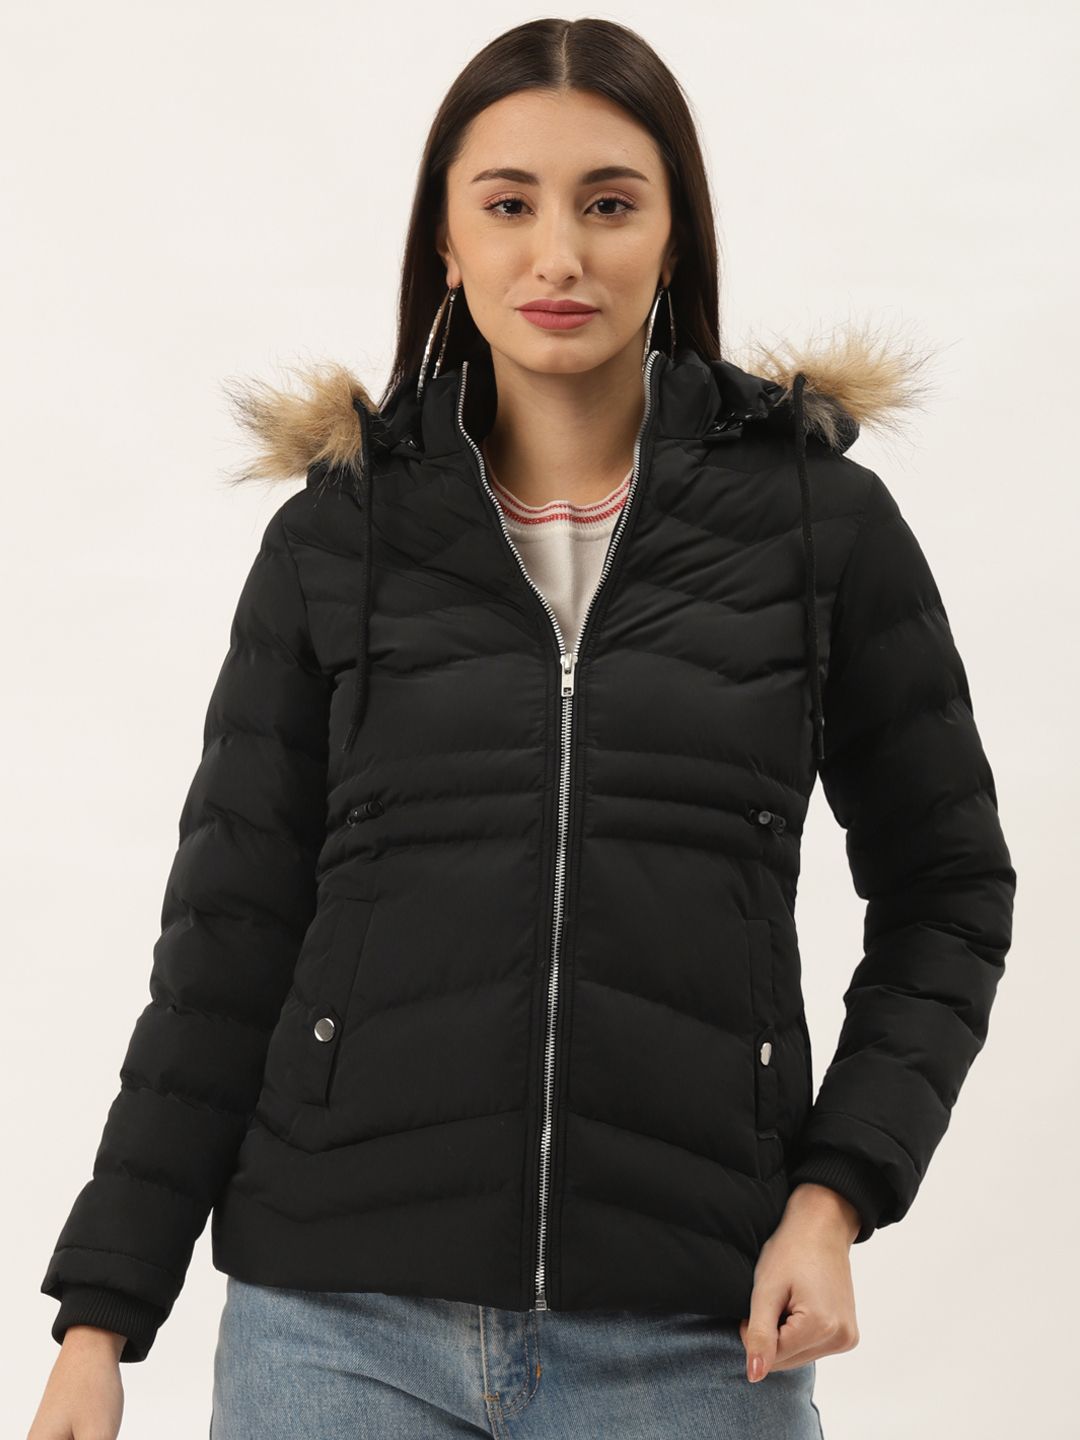 Duke Women Black Solid Parka Jacket with Detachable Hood Price in India